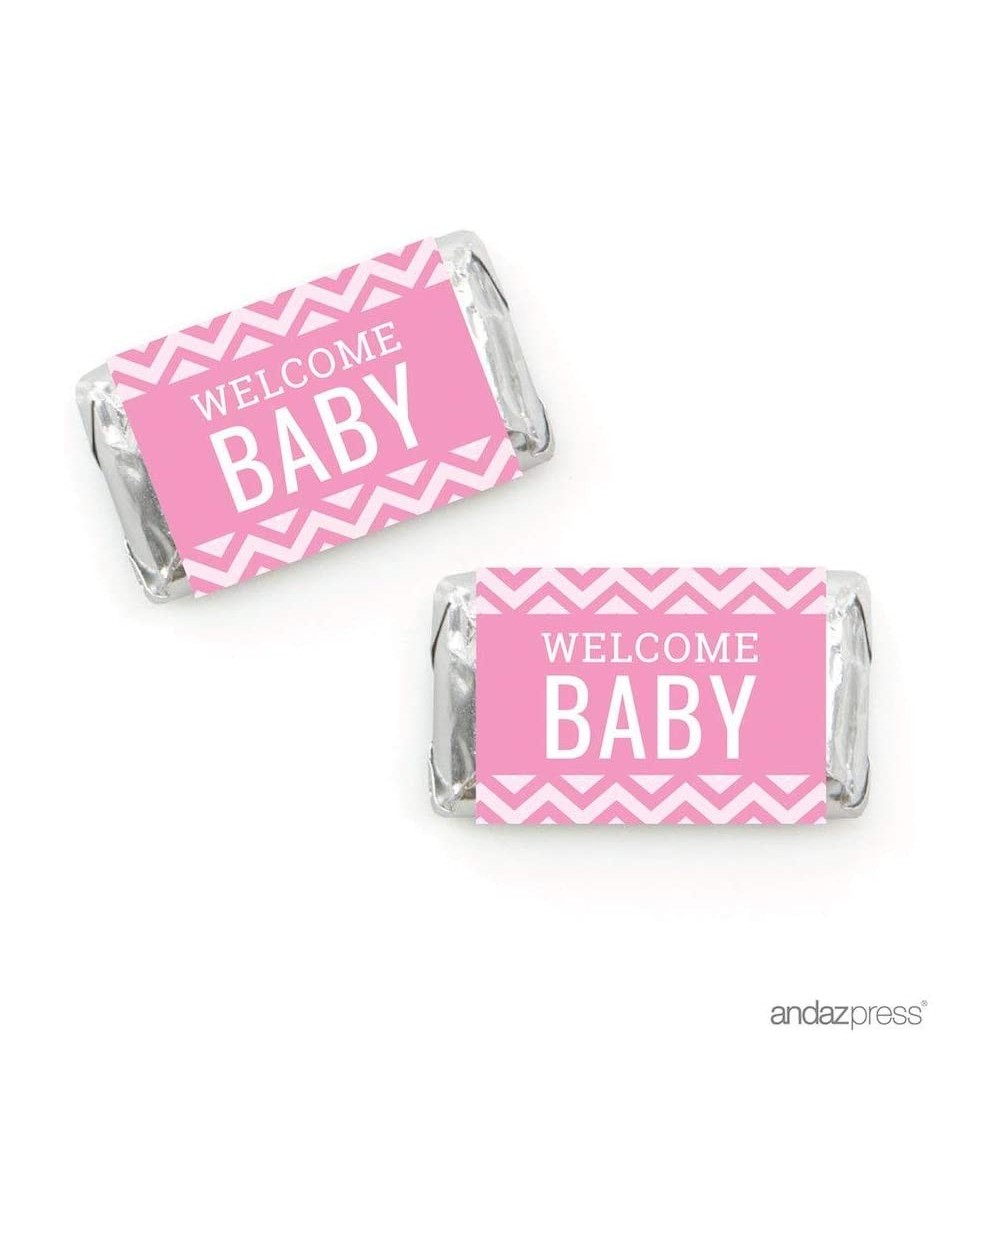 Centerpieces Pink Chevron Girl Baby Shower Collection- Chocolate Mini Labels- Welcome Baby- 36-Pack- Fits Hershey's Miniature...